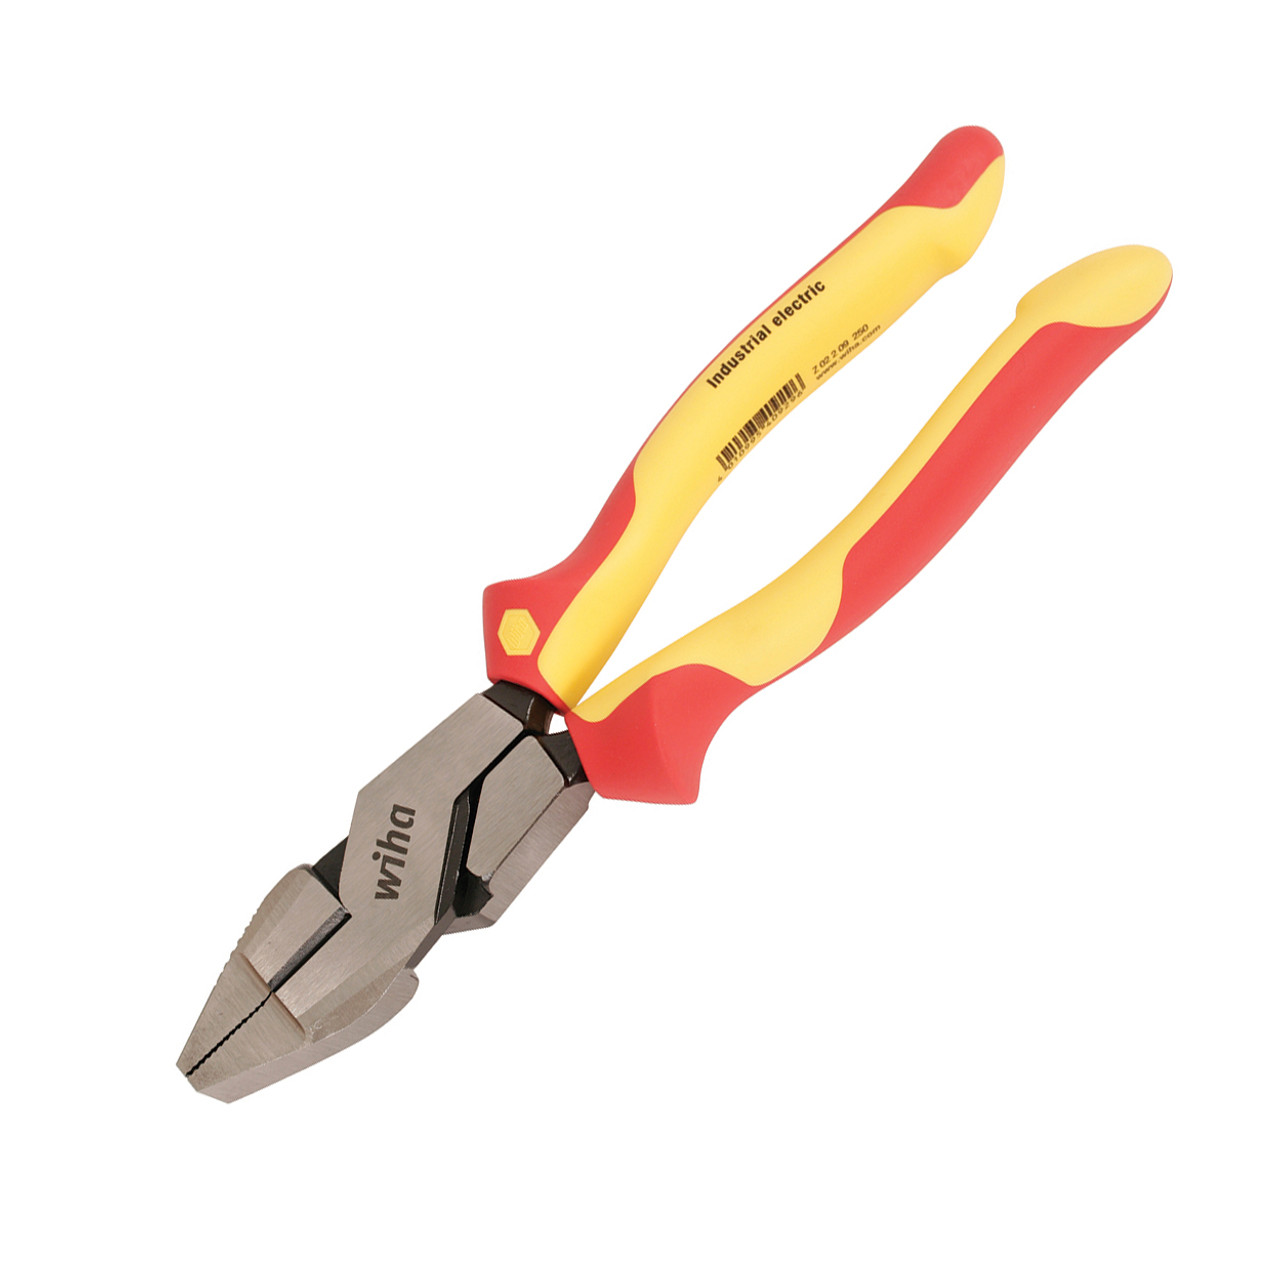 Wiha 32968 Insulated Pliers and Cutters Set (3-Piece)